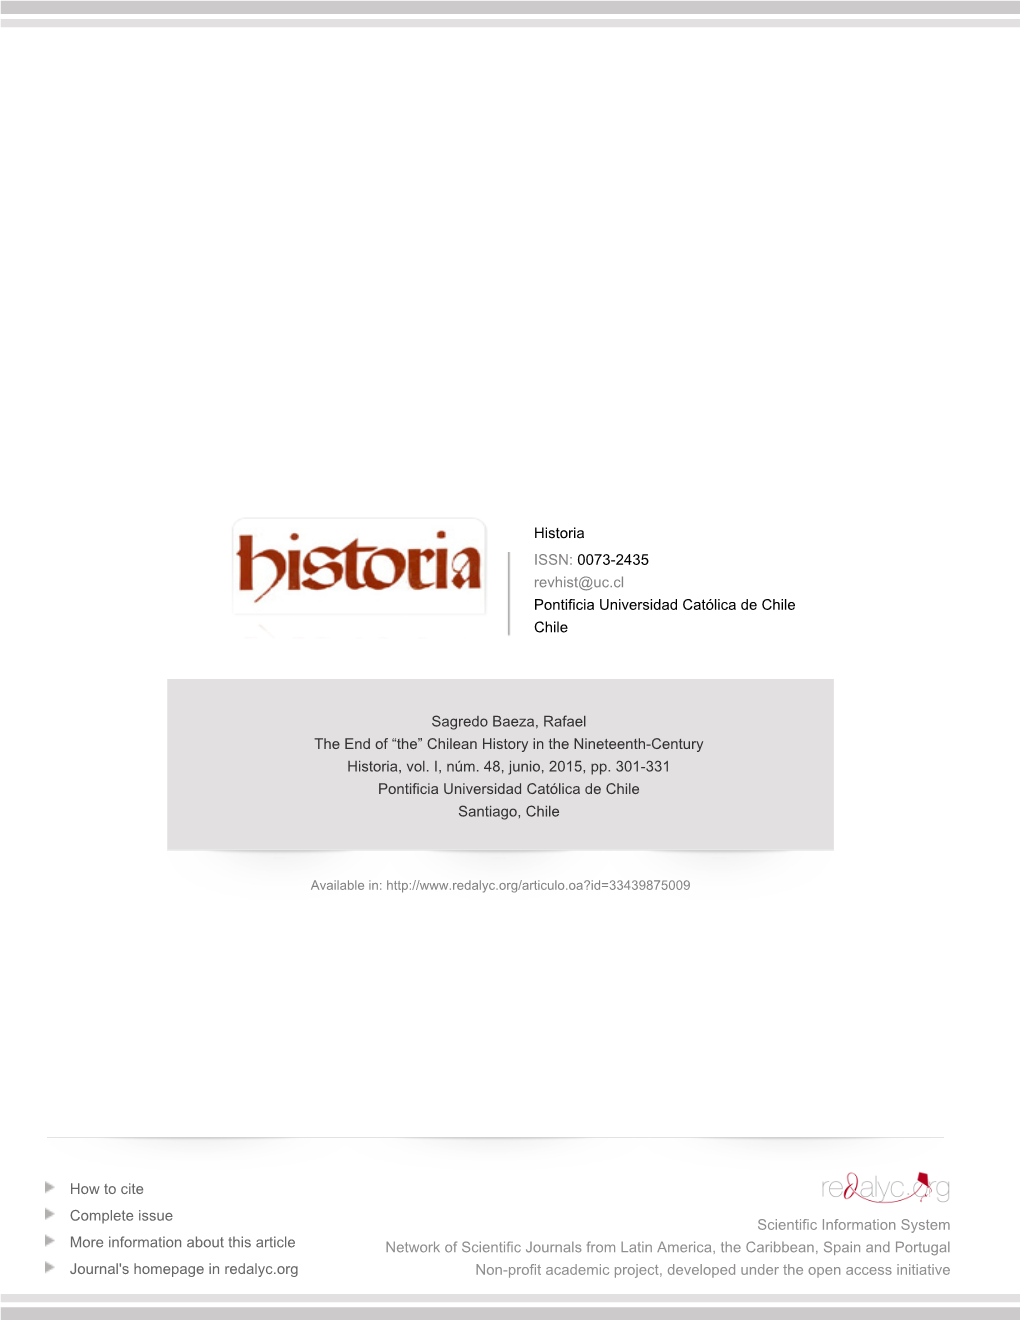 The End of “The” Chilean History in the Nineteenth-Century Historia, Vol